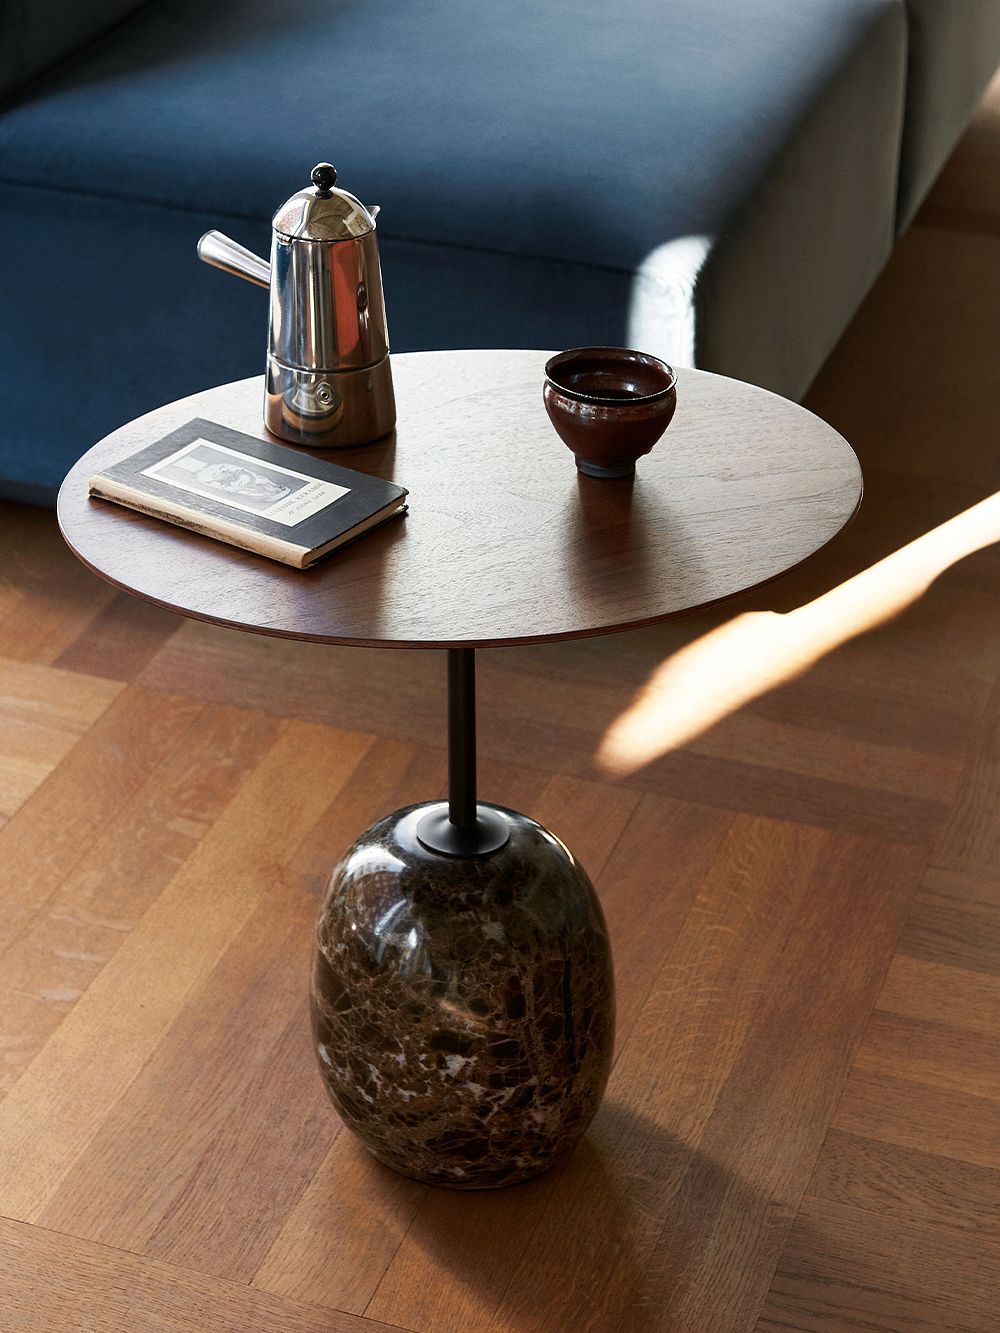 &Tradition's Lato coffee table with a walnut table top and black emperador marble base, placed in a living room.